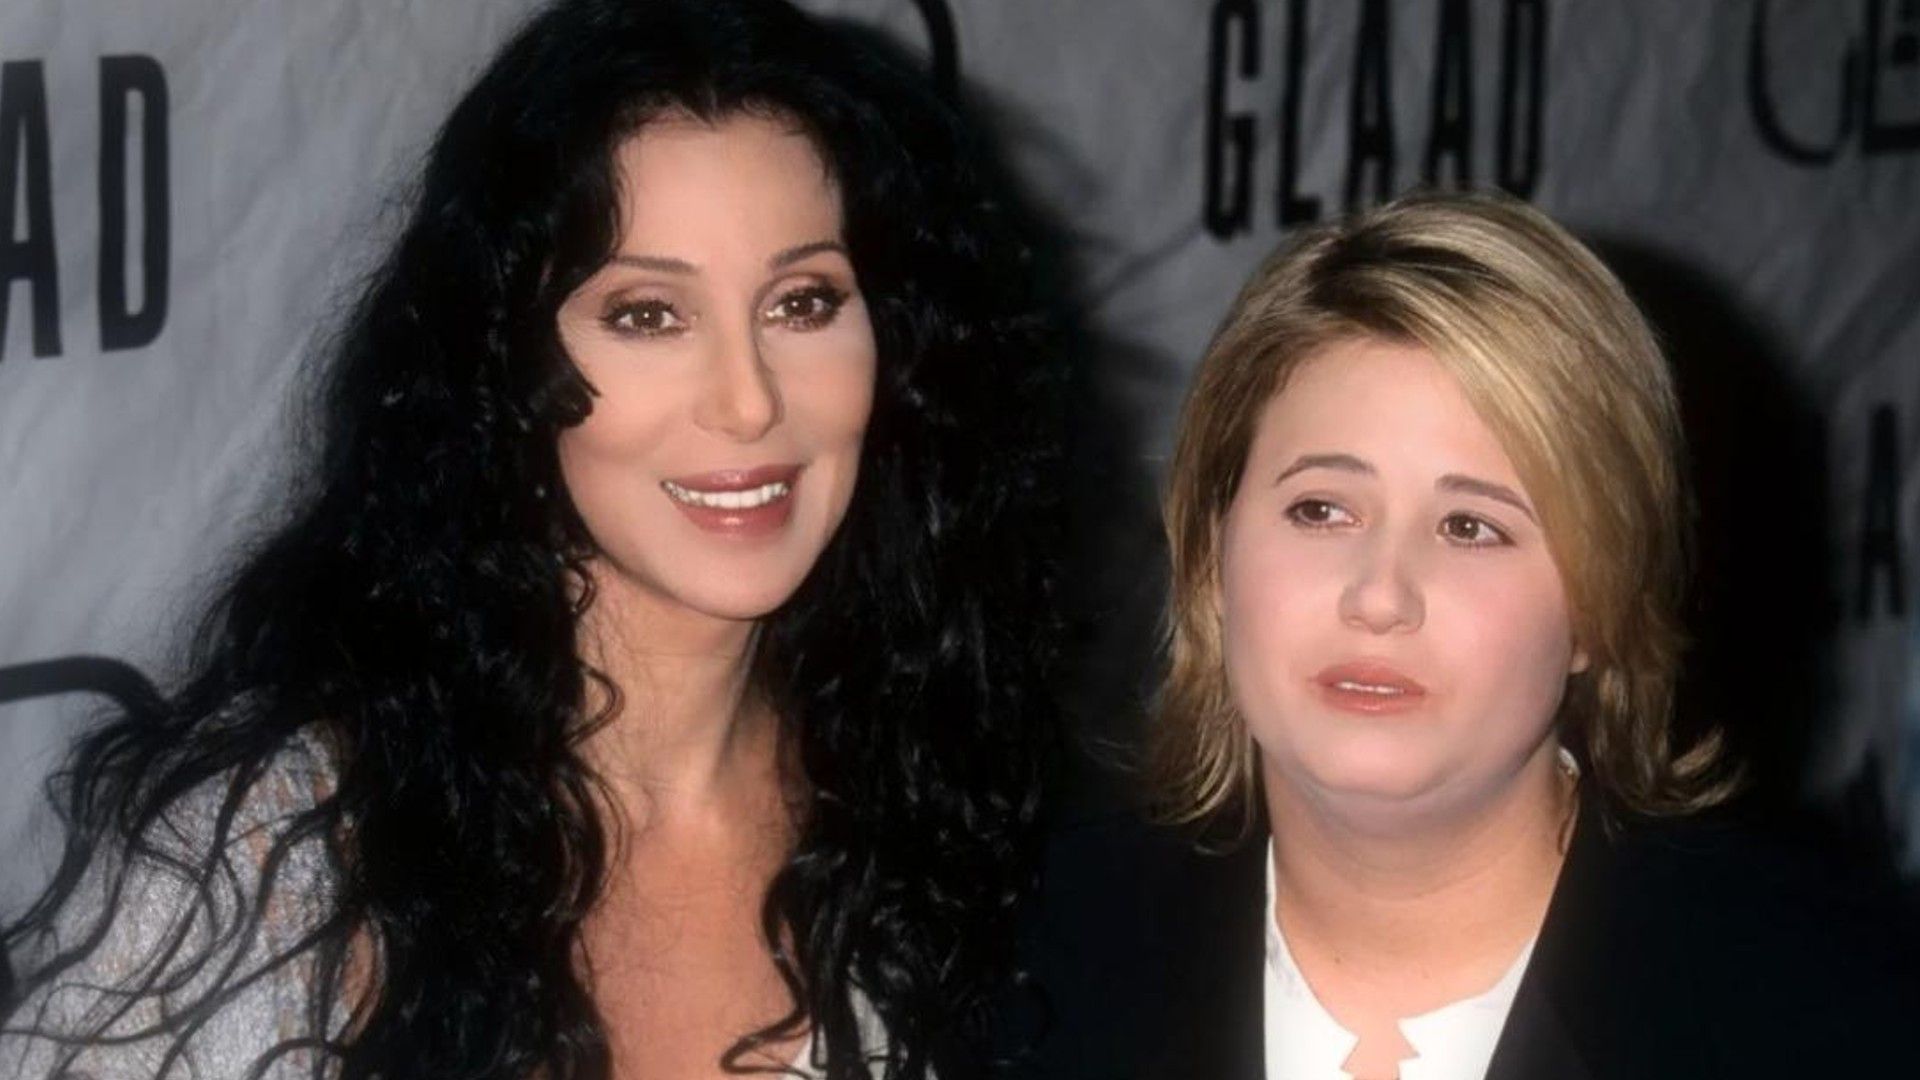 Cher and her daughter